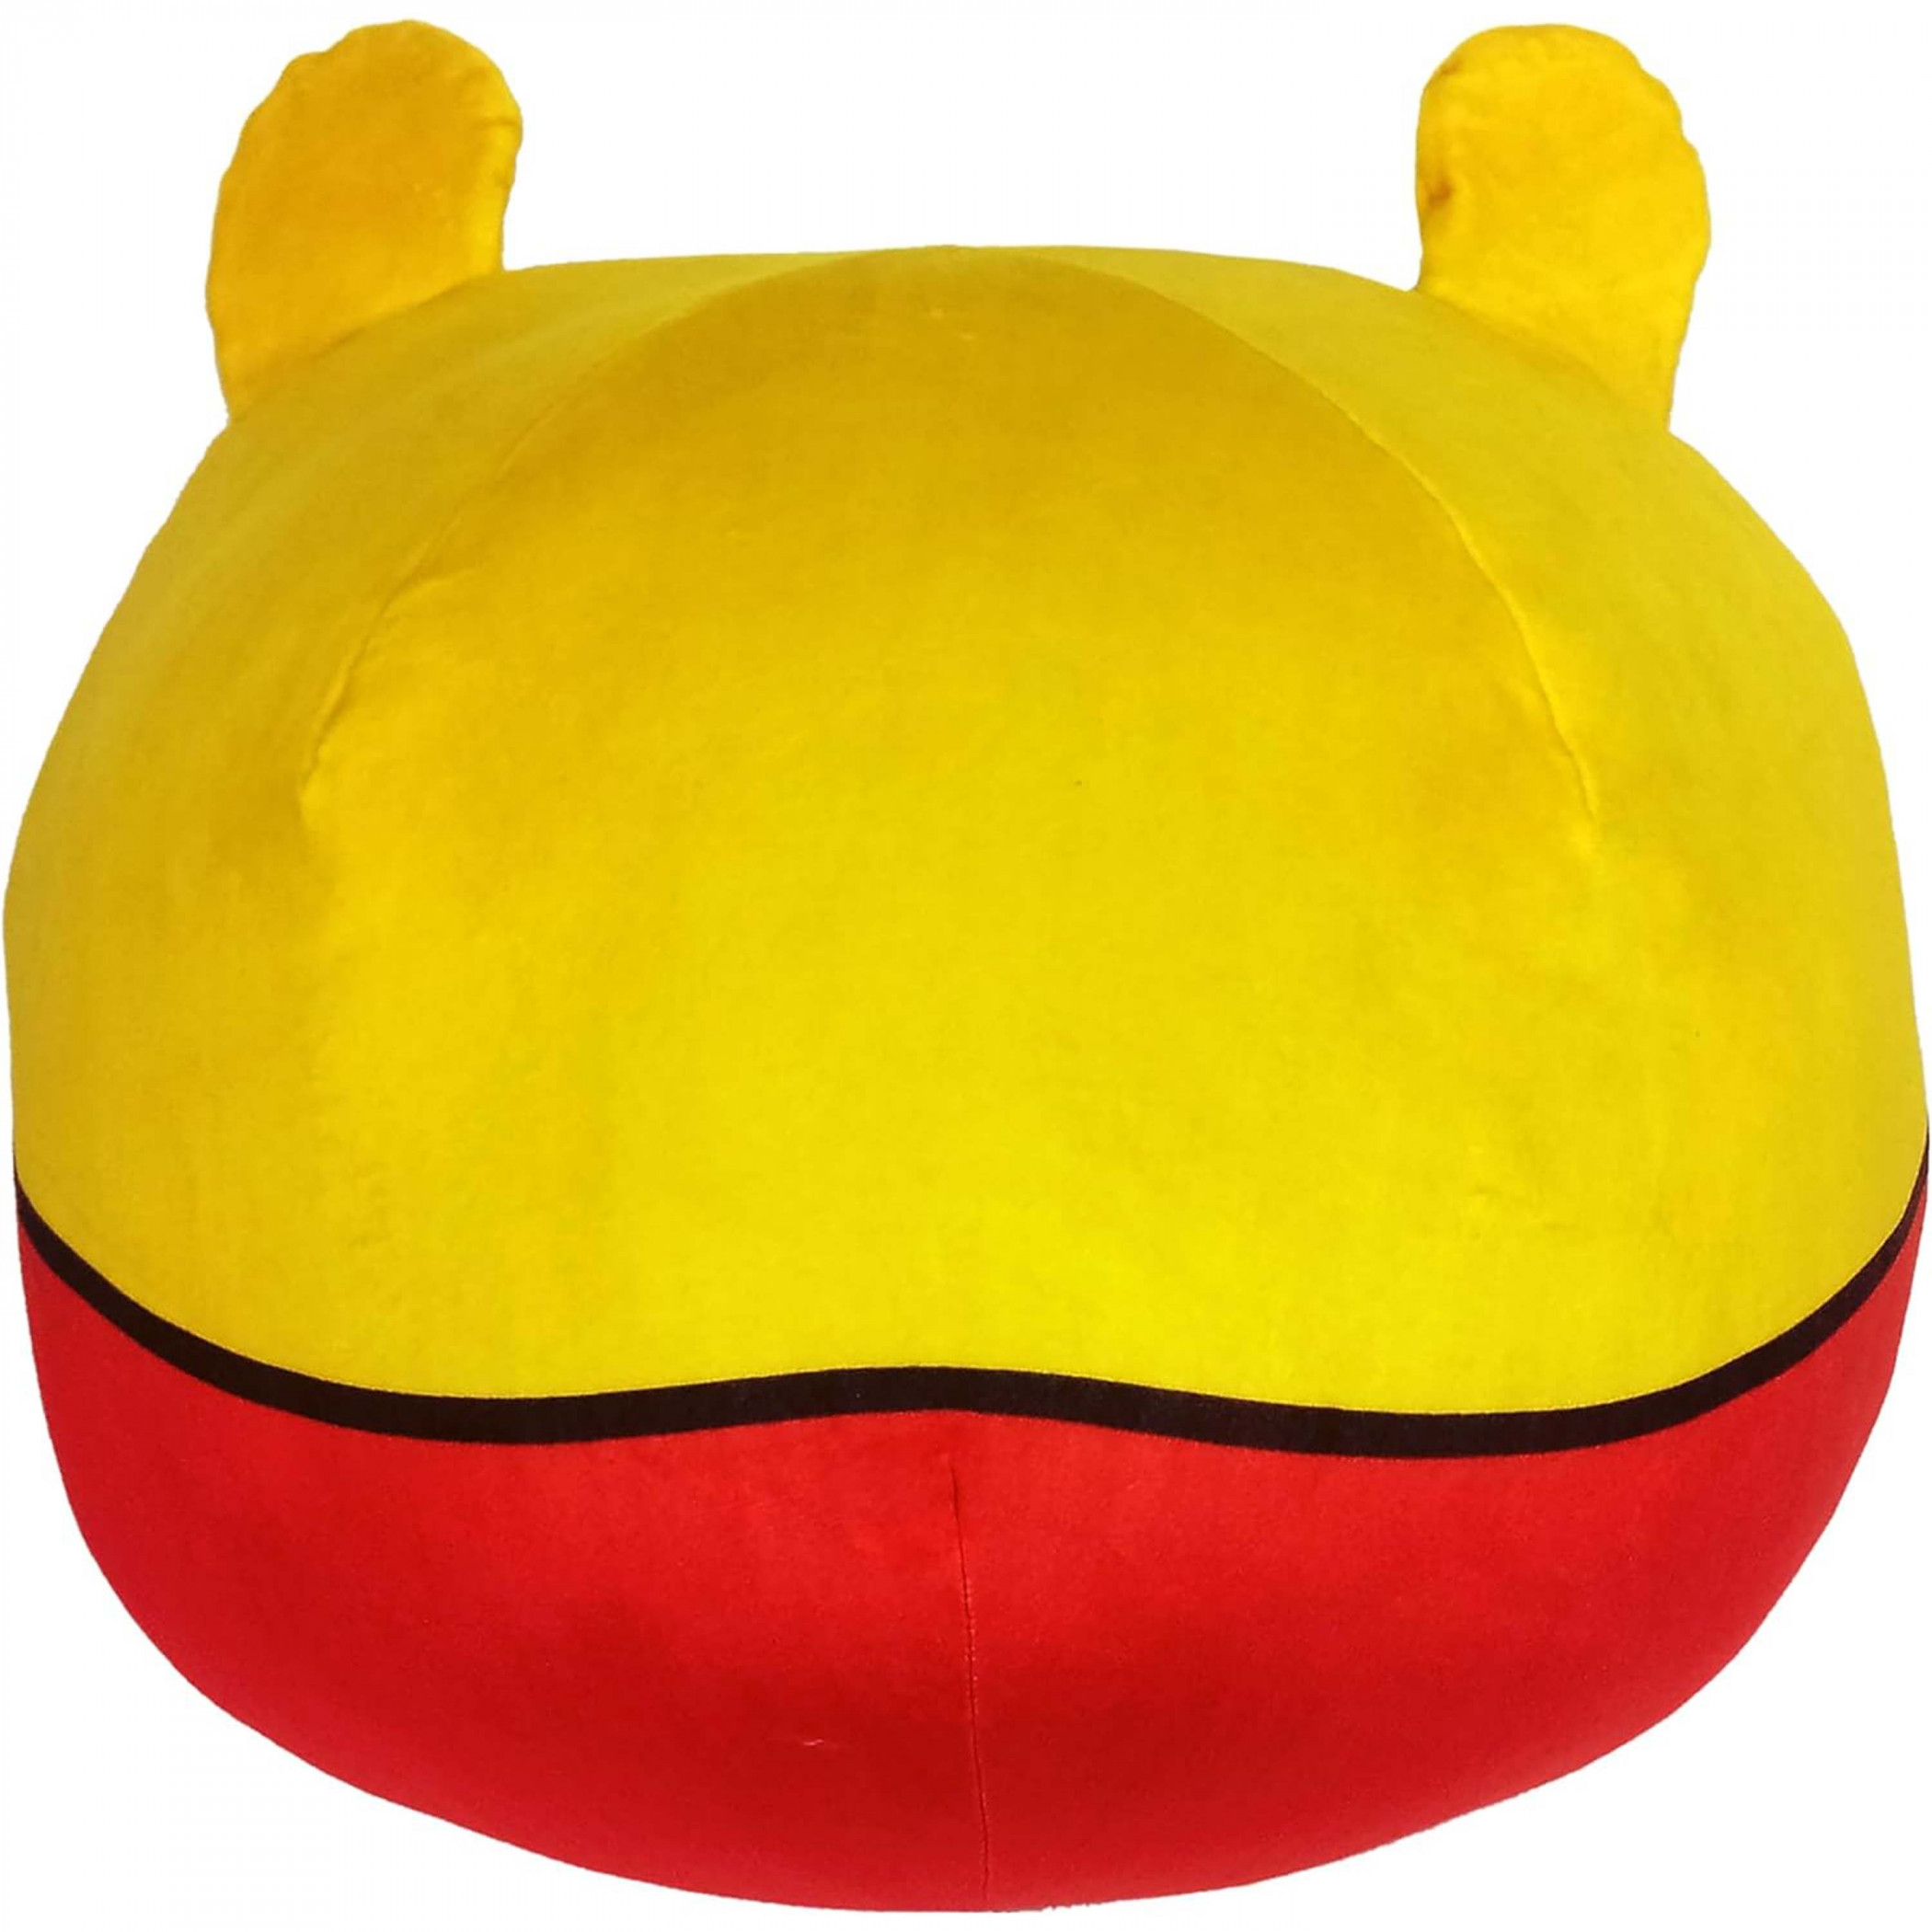 Winnie The Pooh Happy Face 11" Round Cloud Pillow